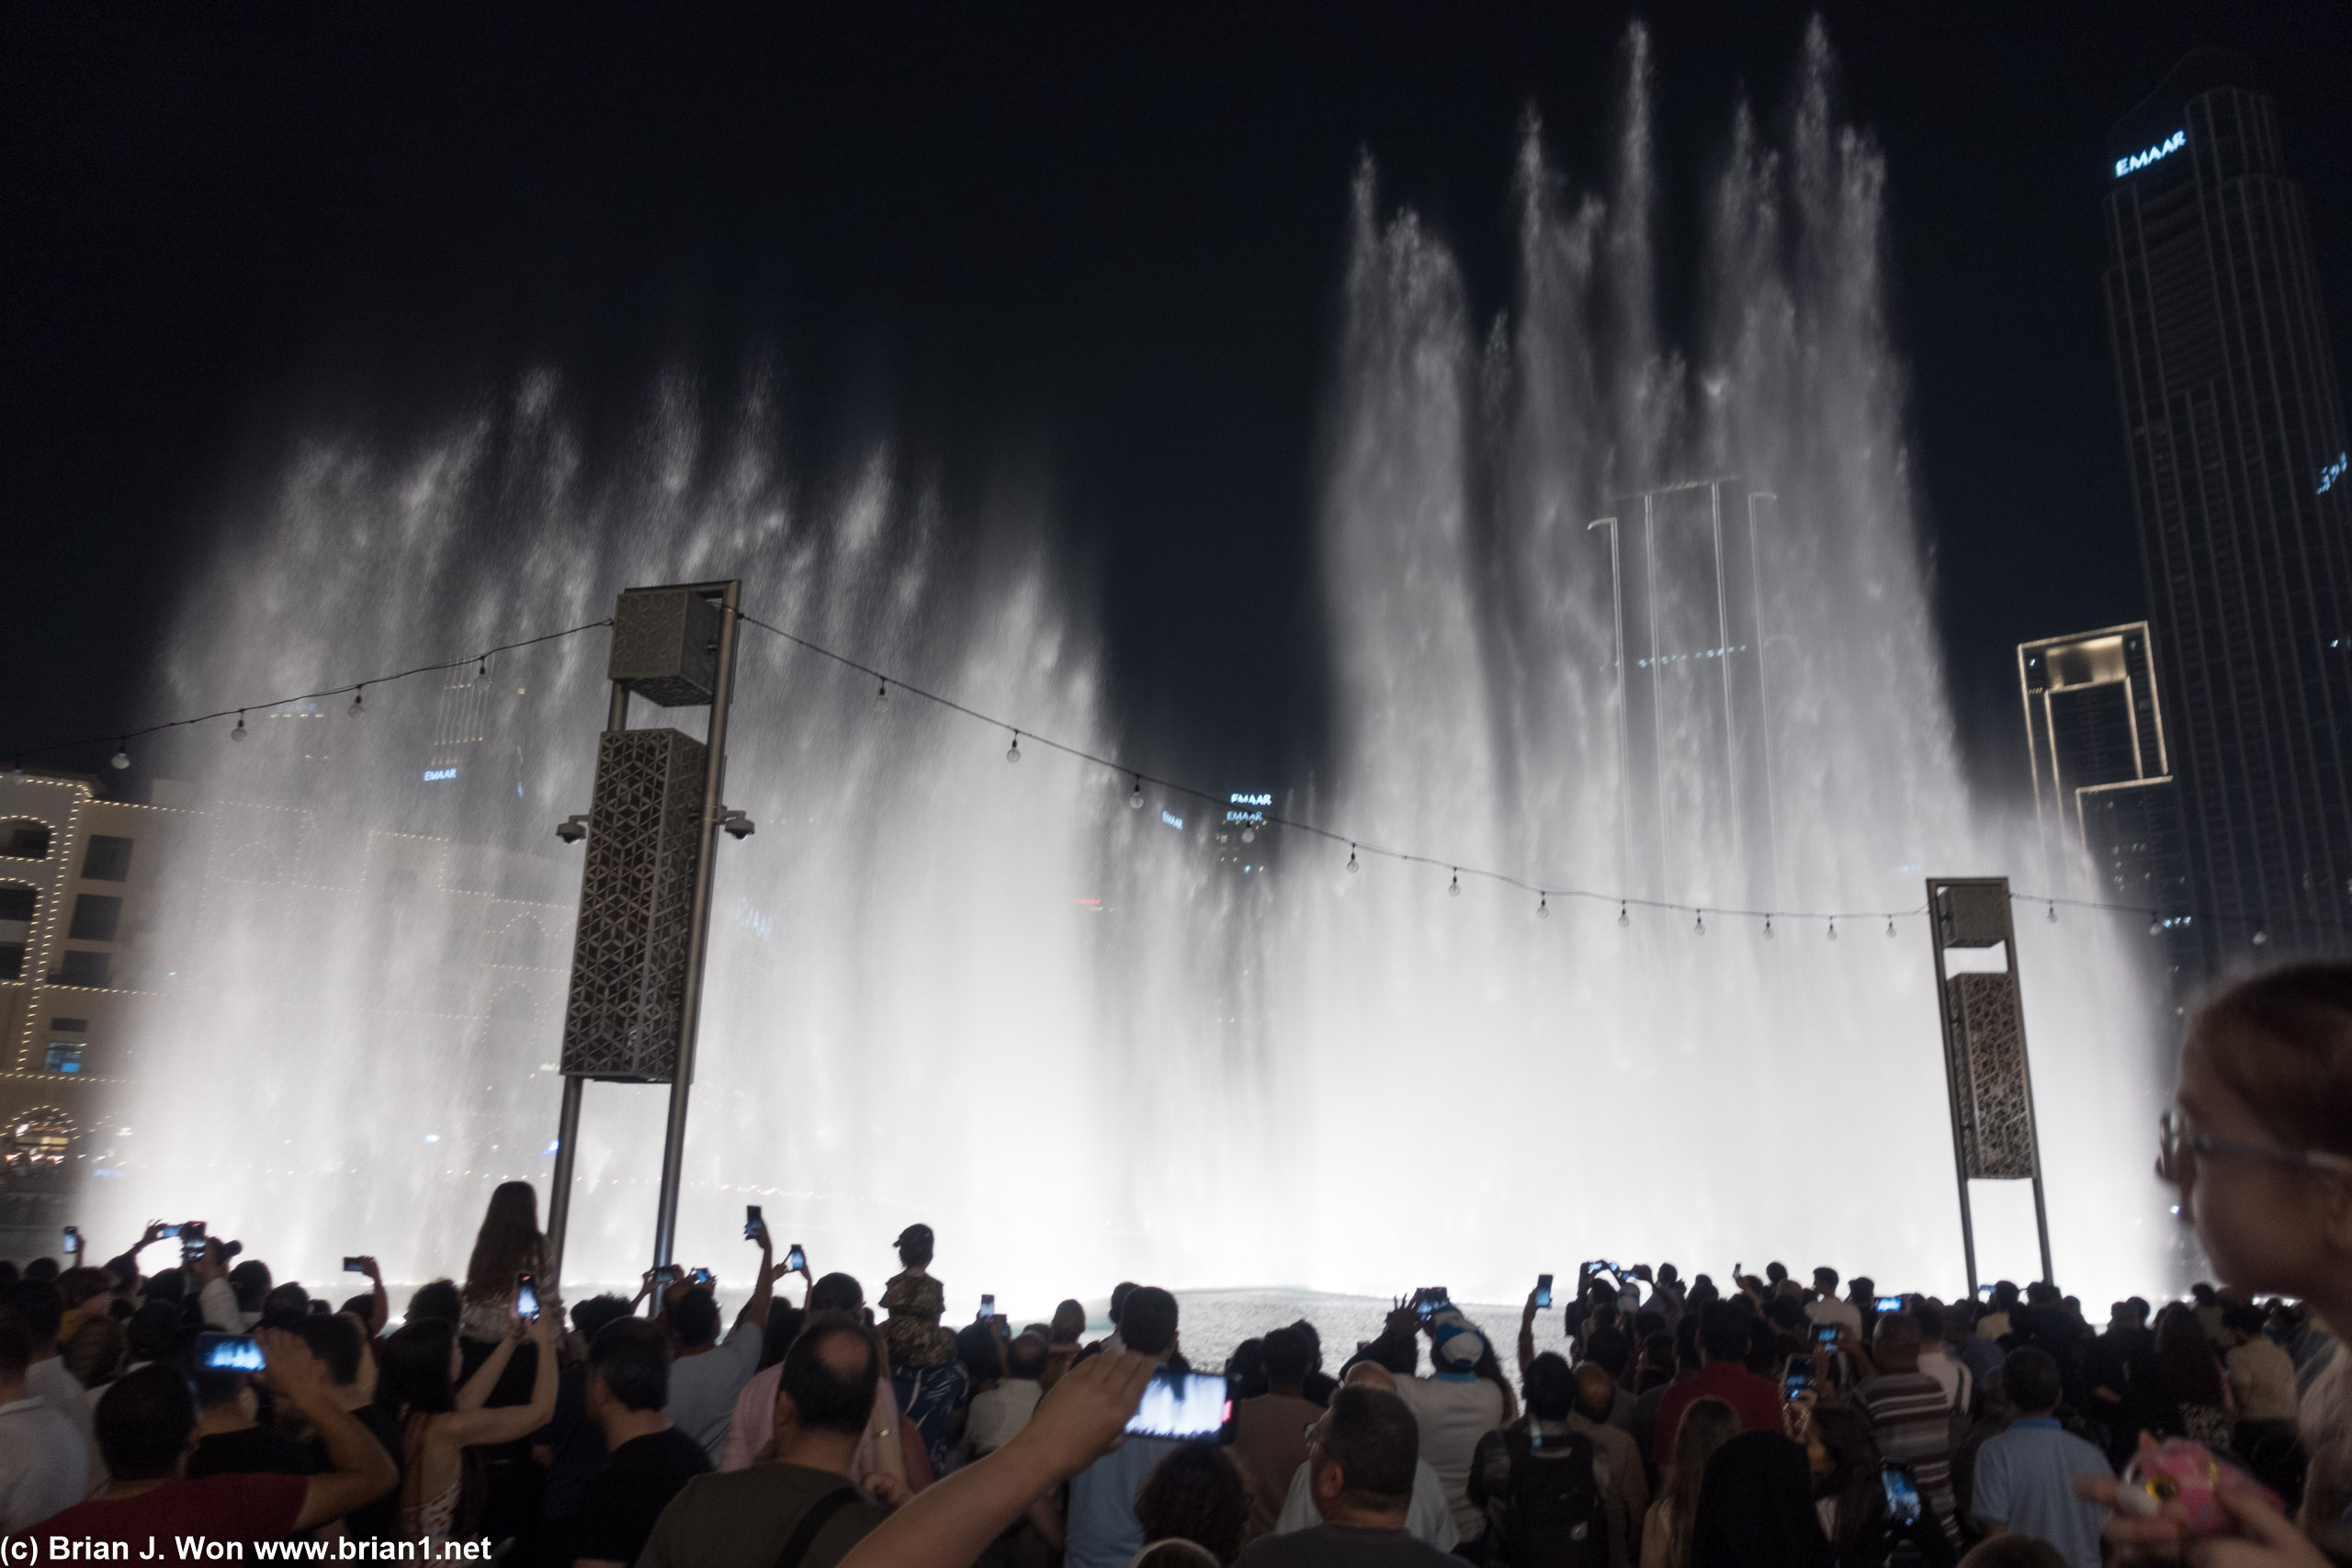 Stepping into the heat to see The Dubai Fountain.